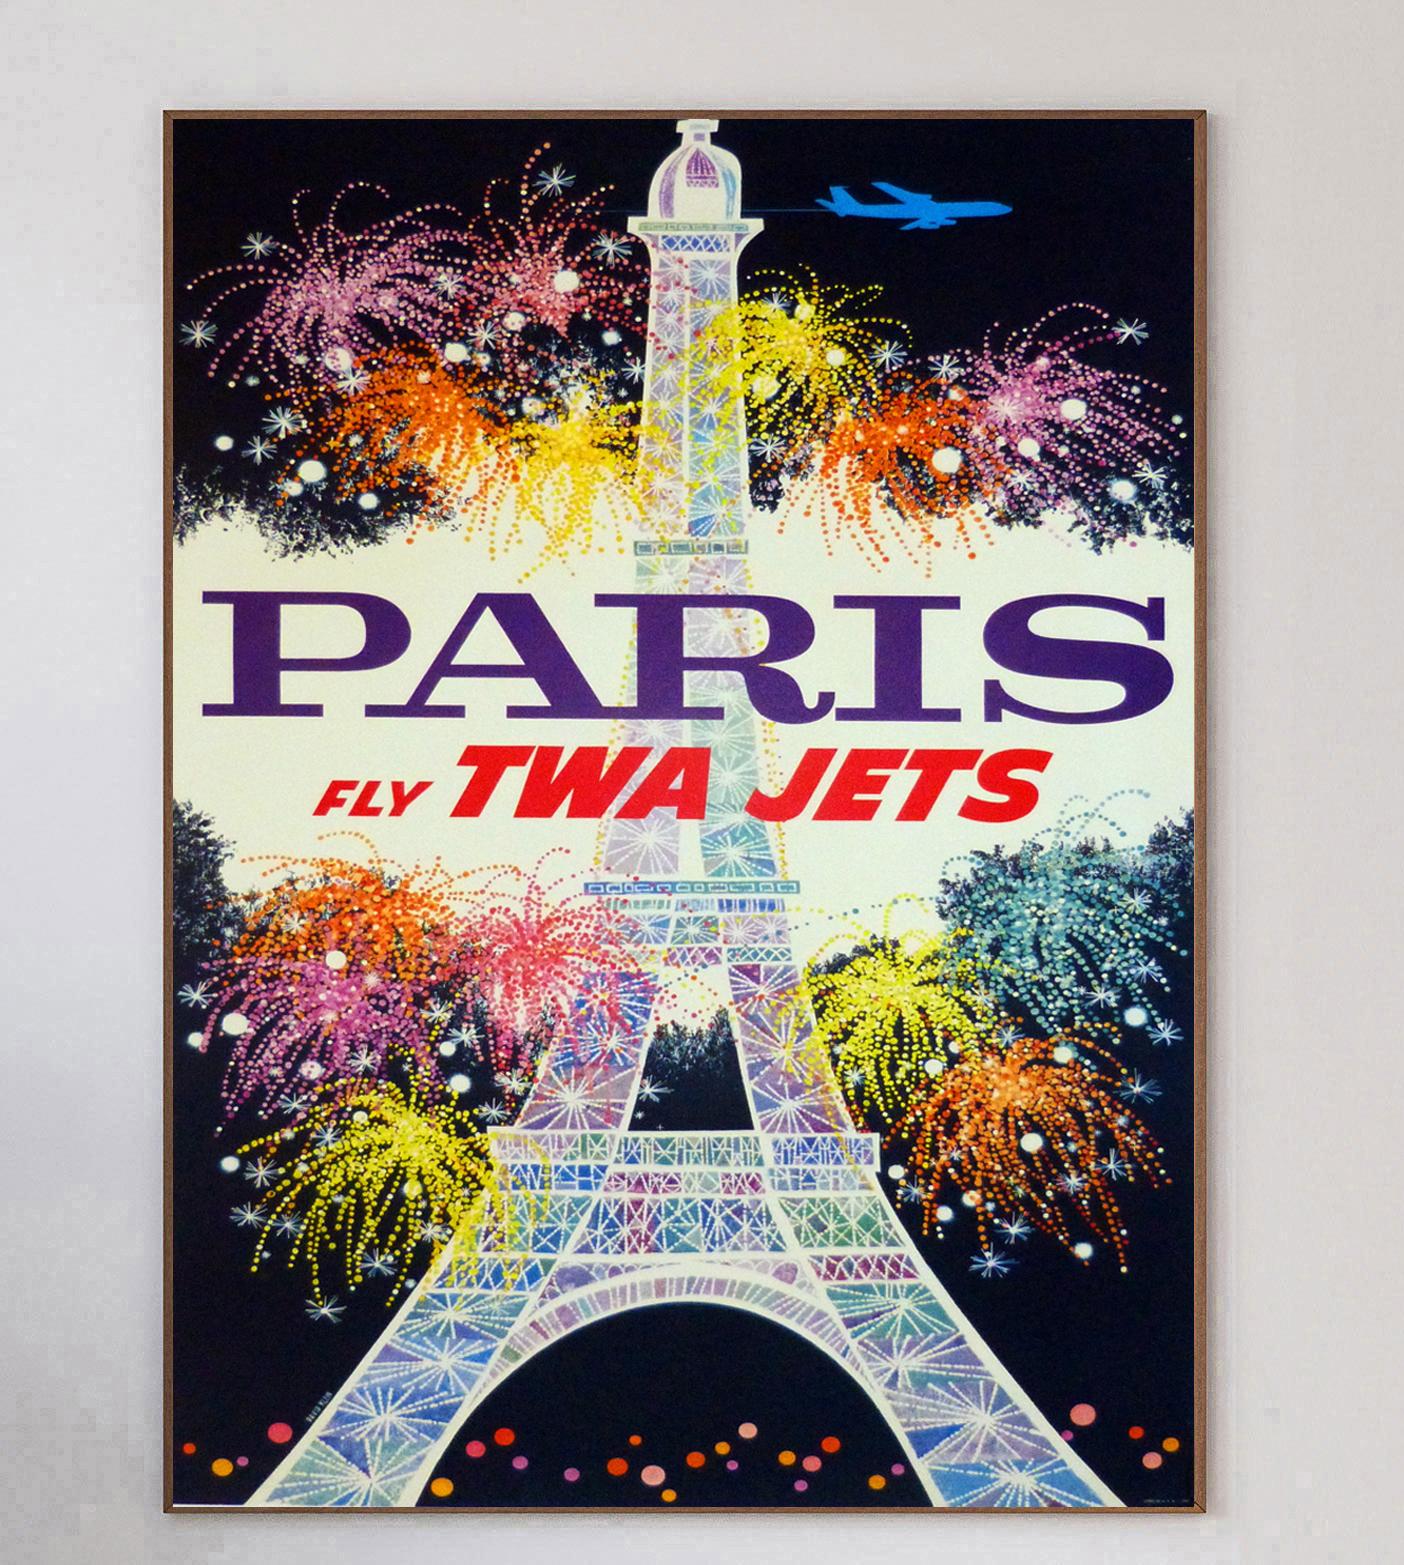 This poster was created in 1960 for Howard Hughes’ Trans World Airlines promoting their routes to Los Angeles, California. Illustrated by influential American artist David Klein, this design features a wonderful image of the Eiffel Tower at